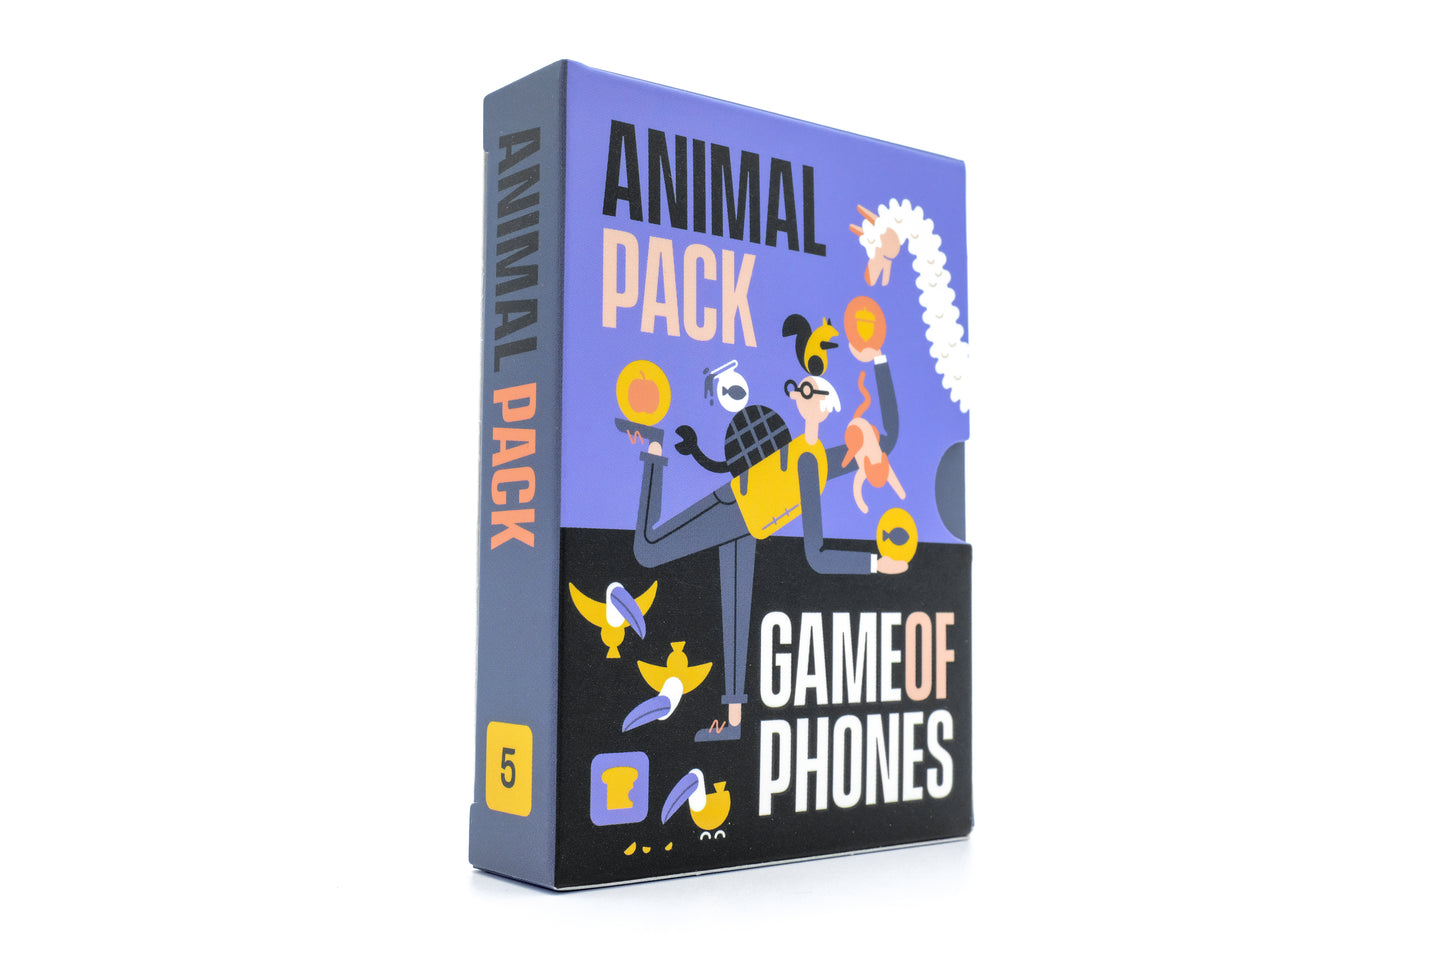 Game of Phones: The Animal Mini Pack